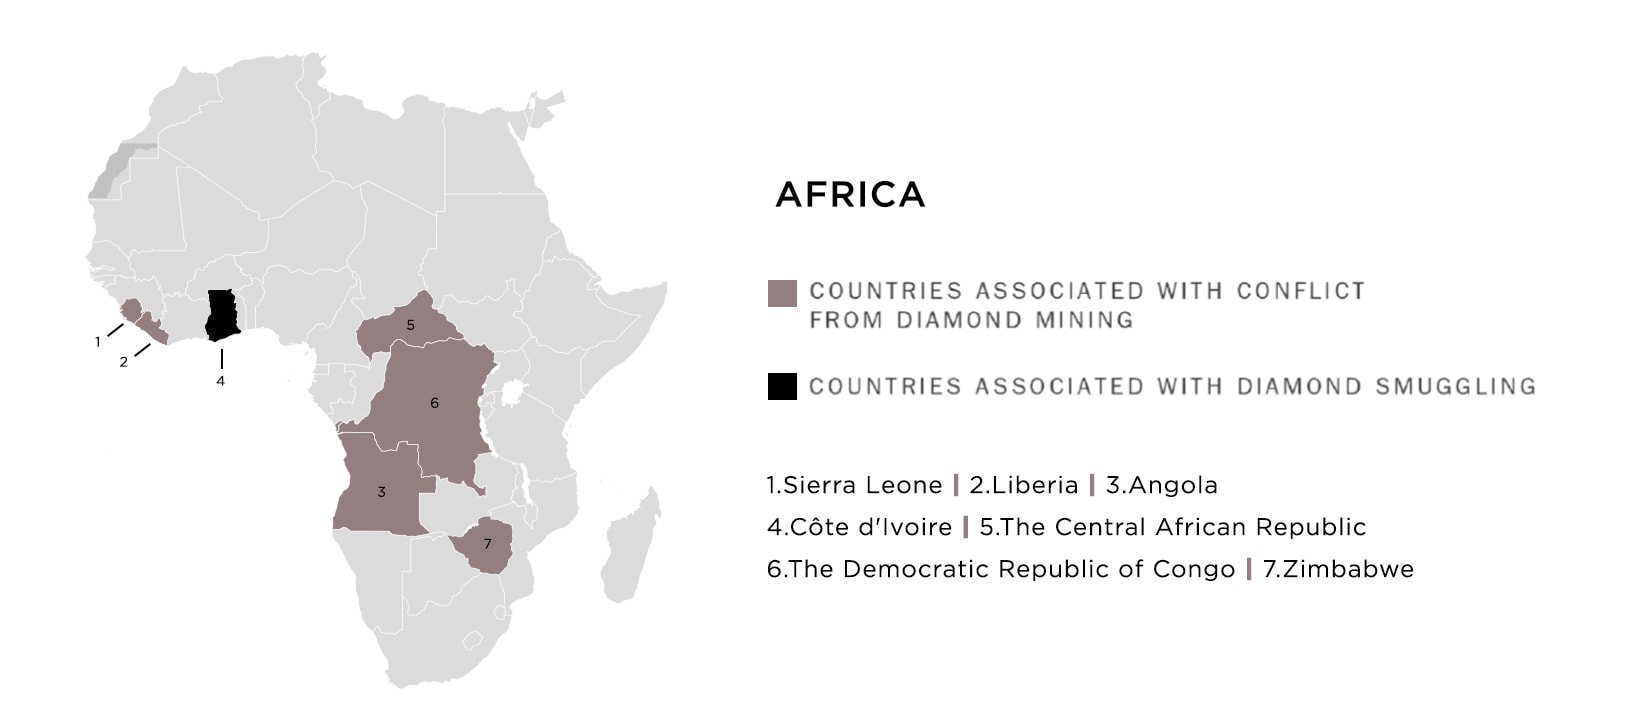 Map of countries in Africa associated with conflict and smuggling